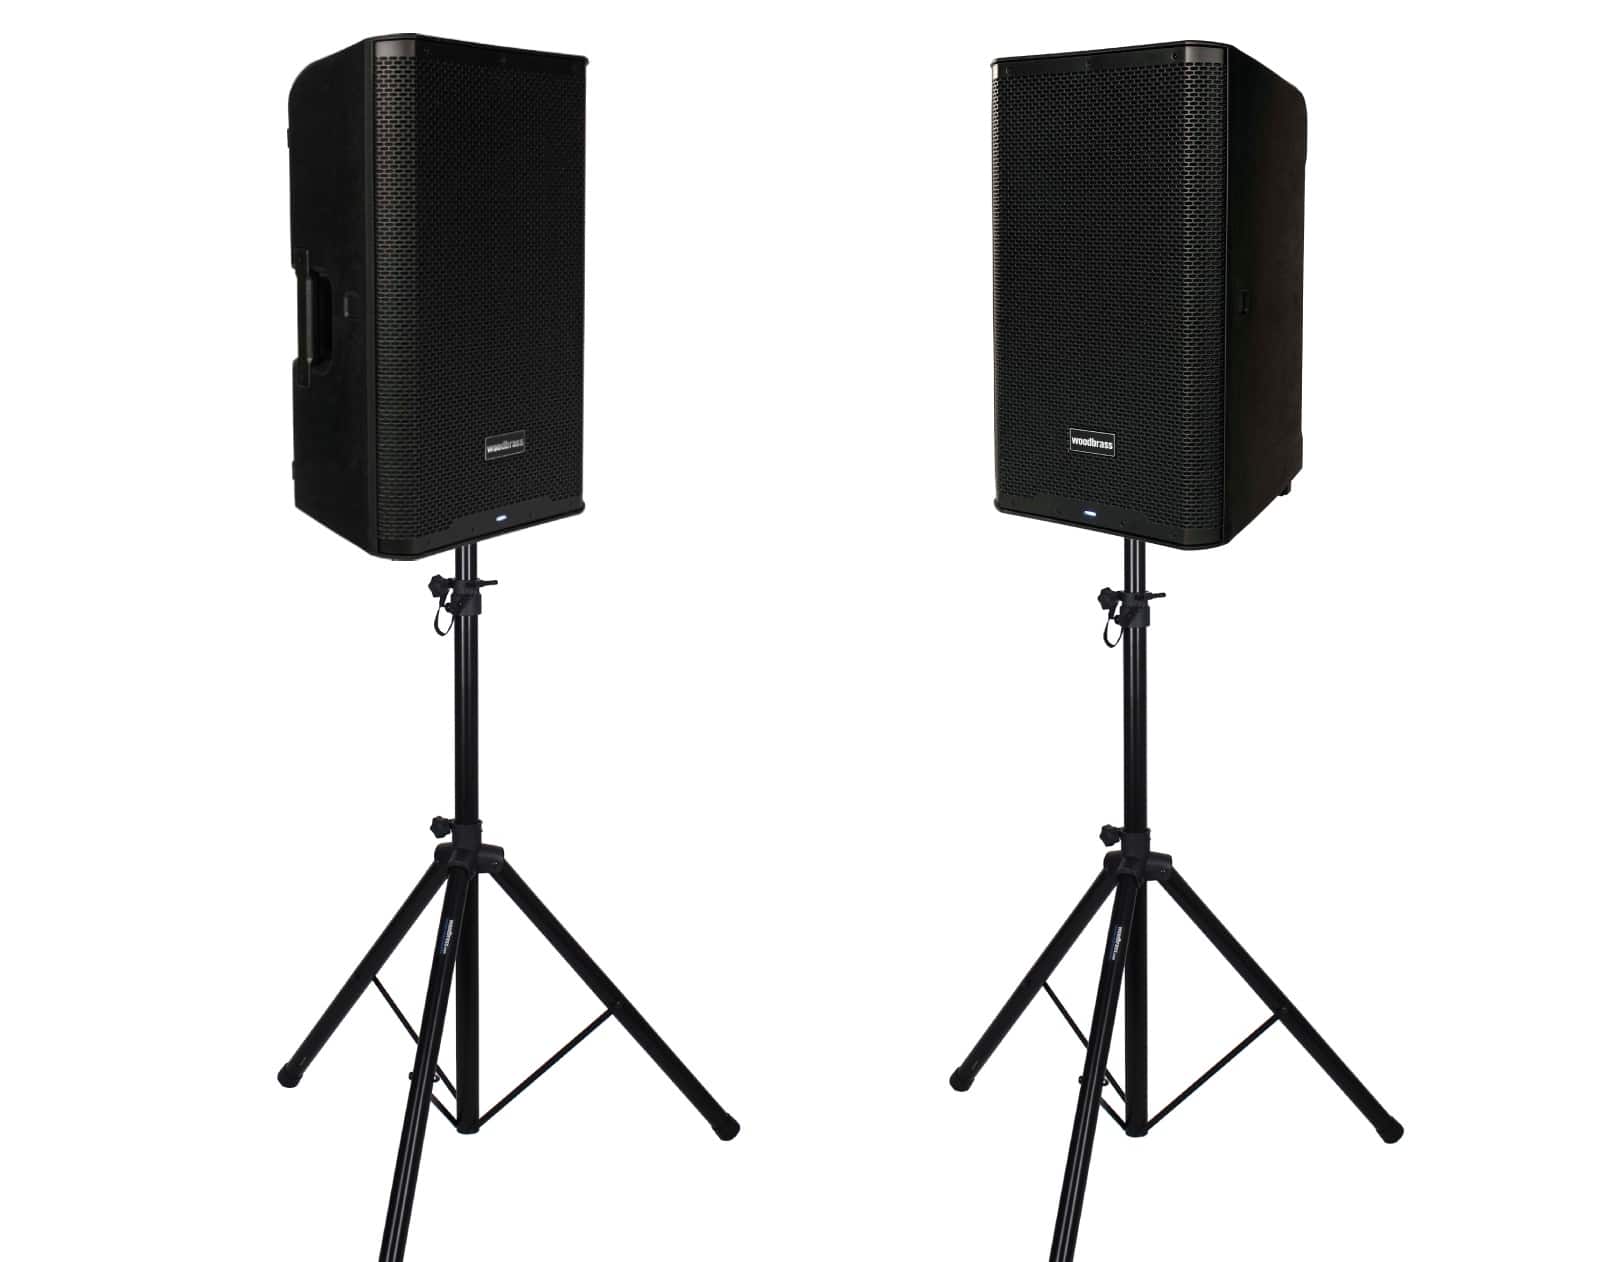 WOODBRASS DXPRO12 PACK + SPEAKER STANDS